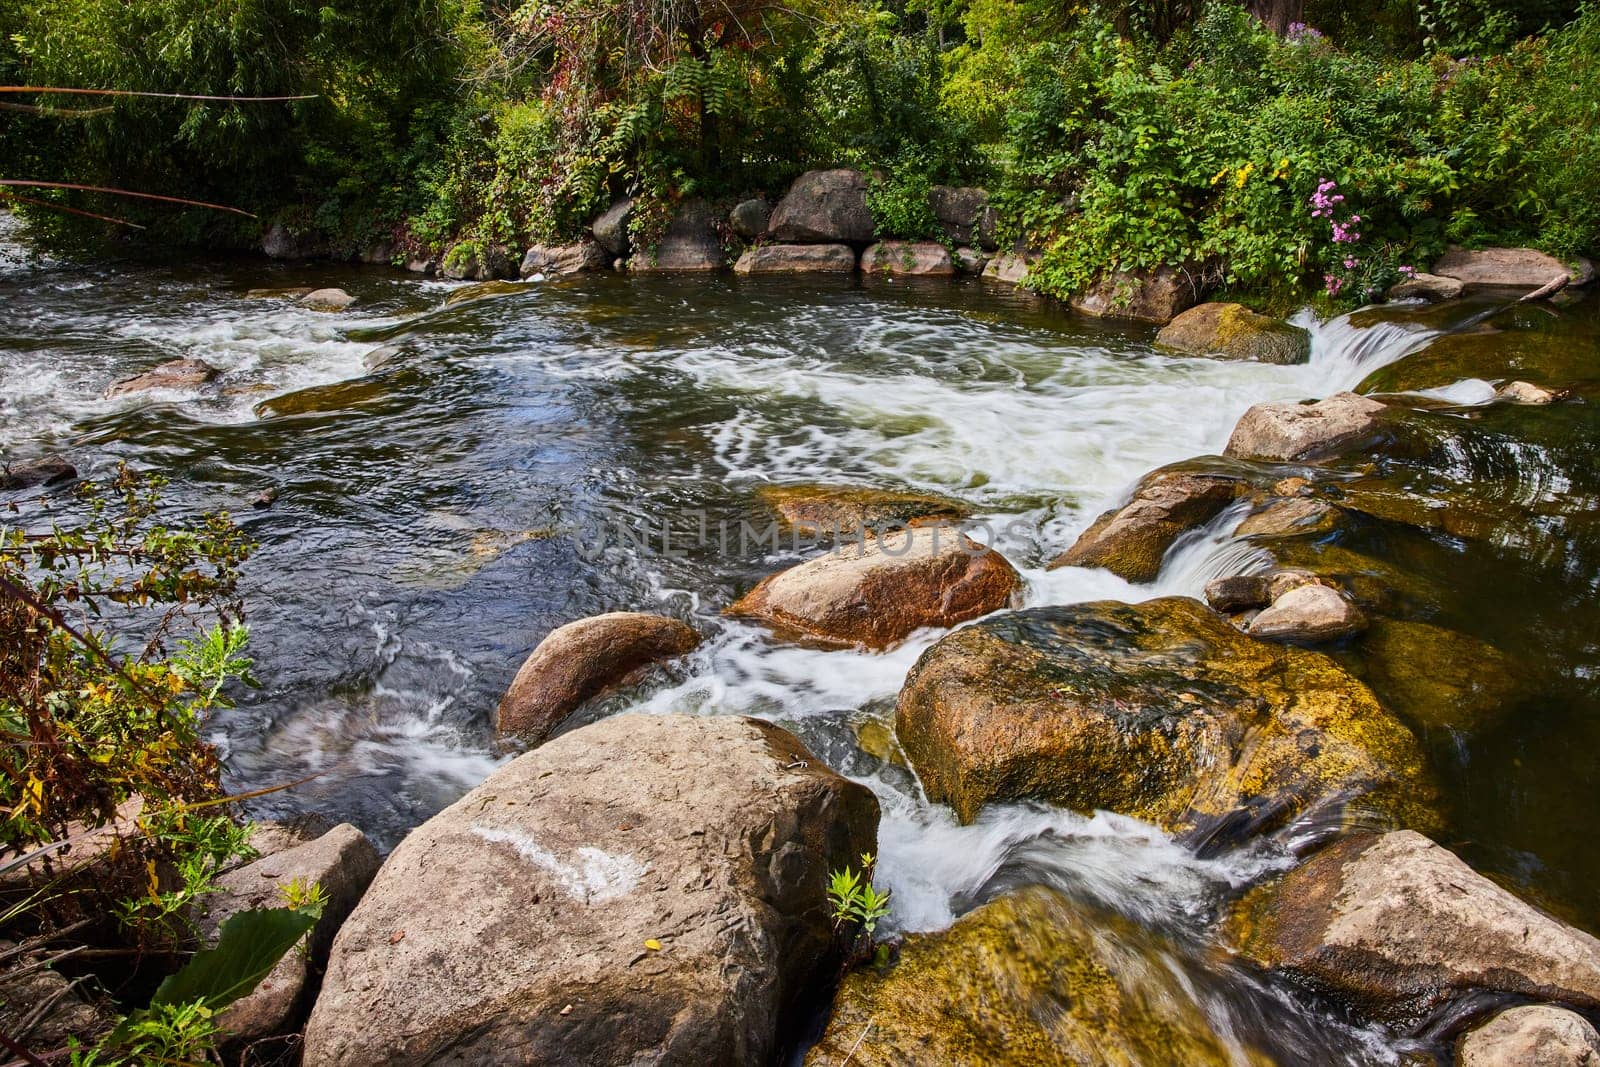 Swift River Flow Over Rocks in Lush Forest Setting by njproductions